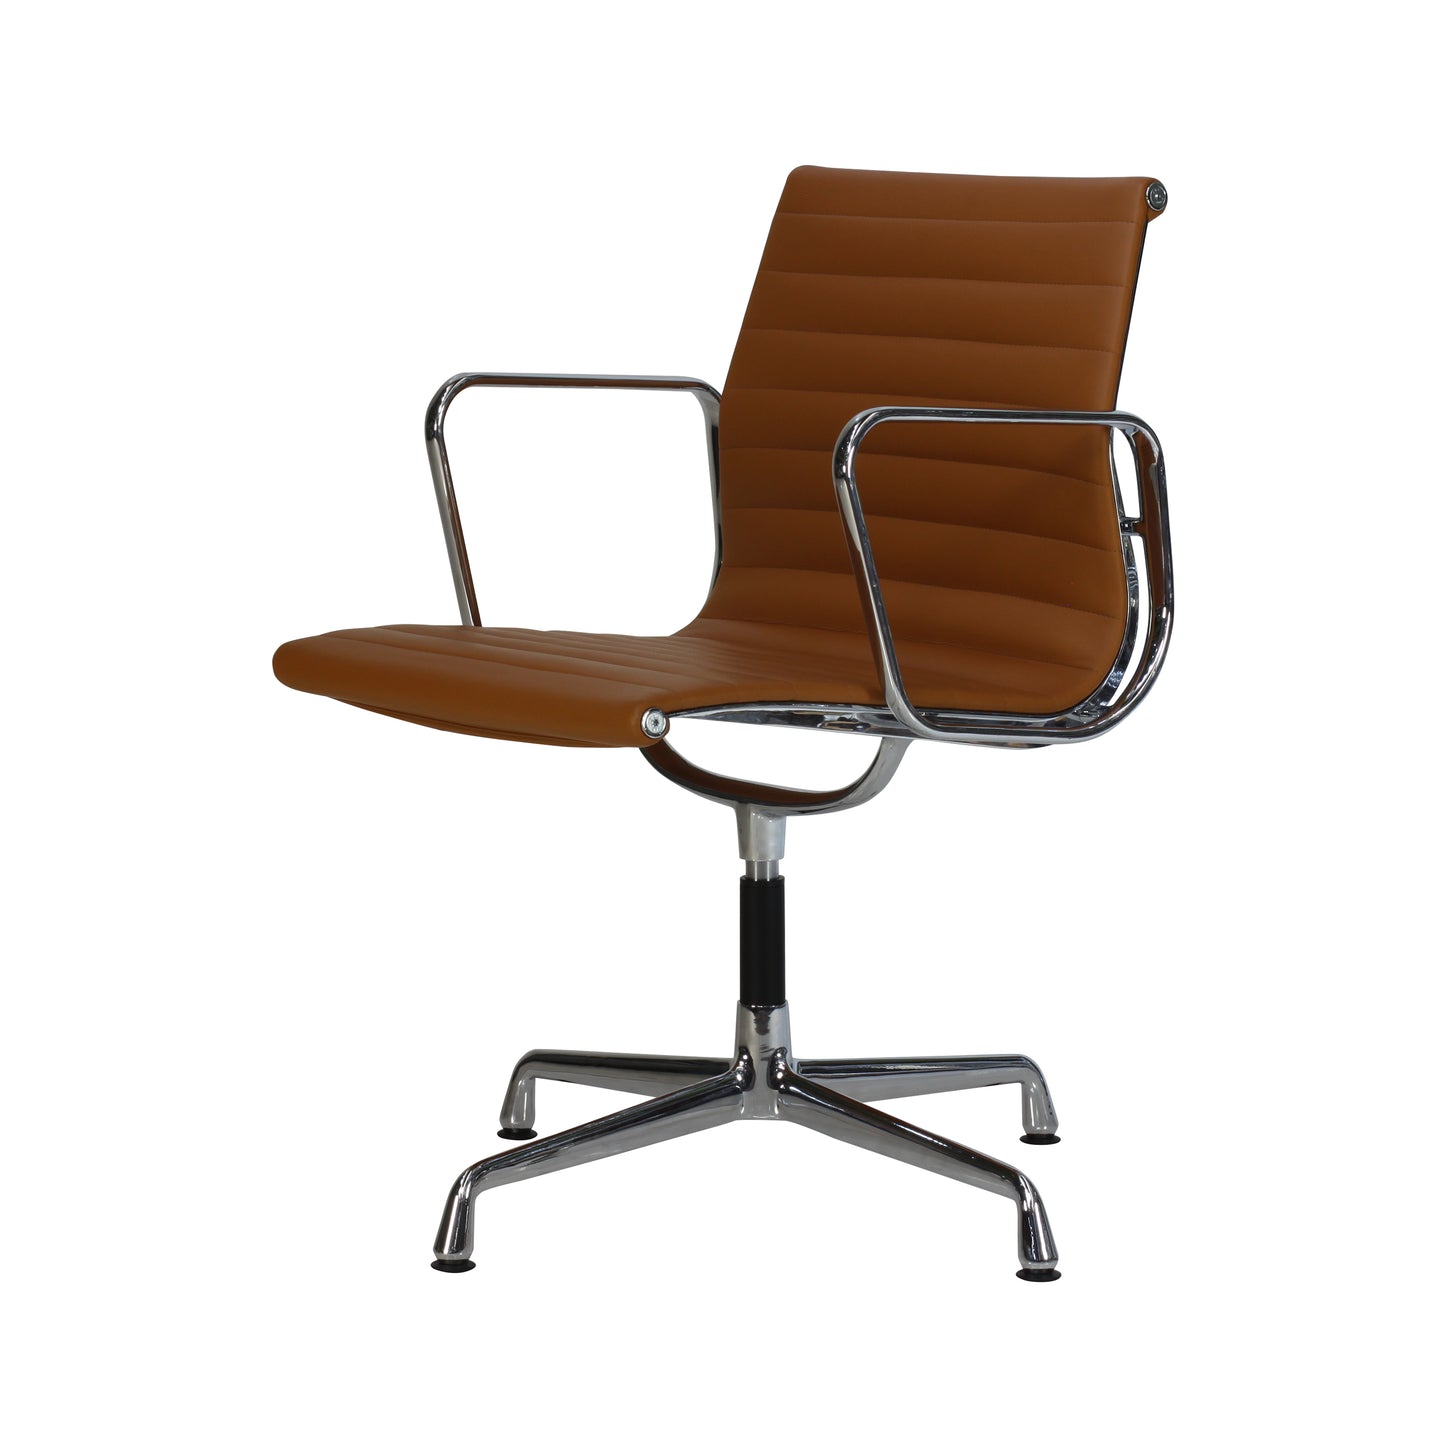 Chair without wheels aluminium style | Cognac Leather | Side